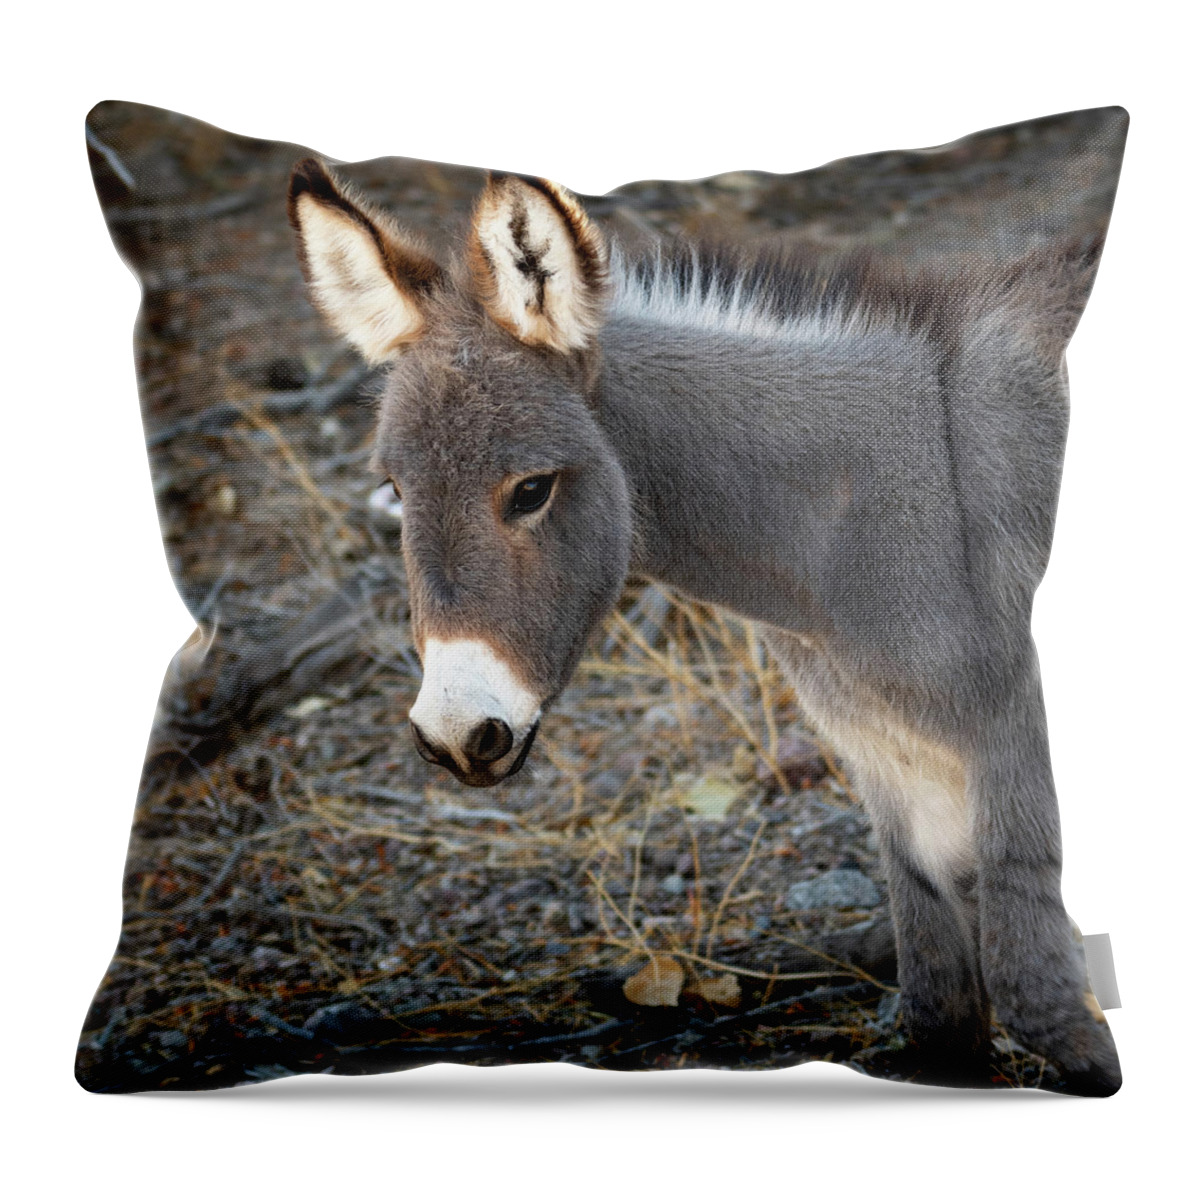 Wild Burros Throw Pillow featuring the photograph Fuzzy Ears by Mary Hone